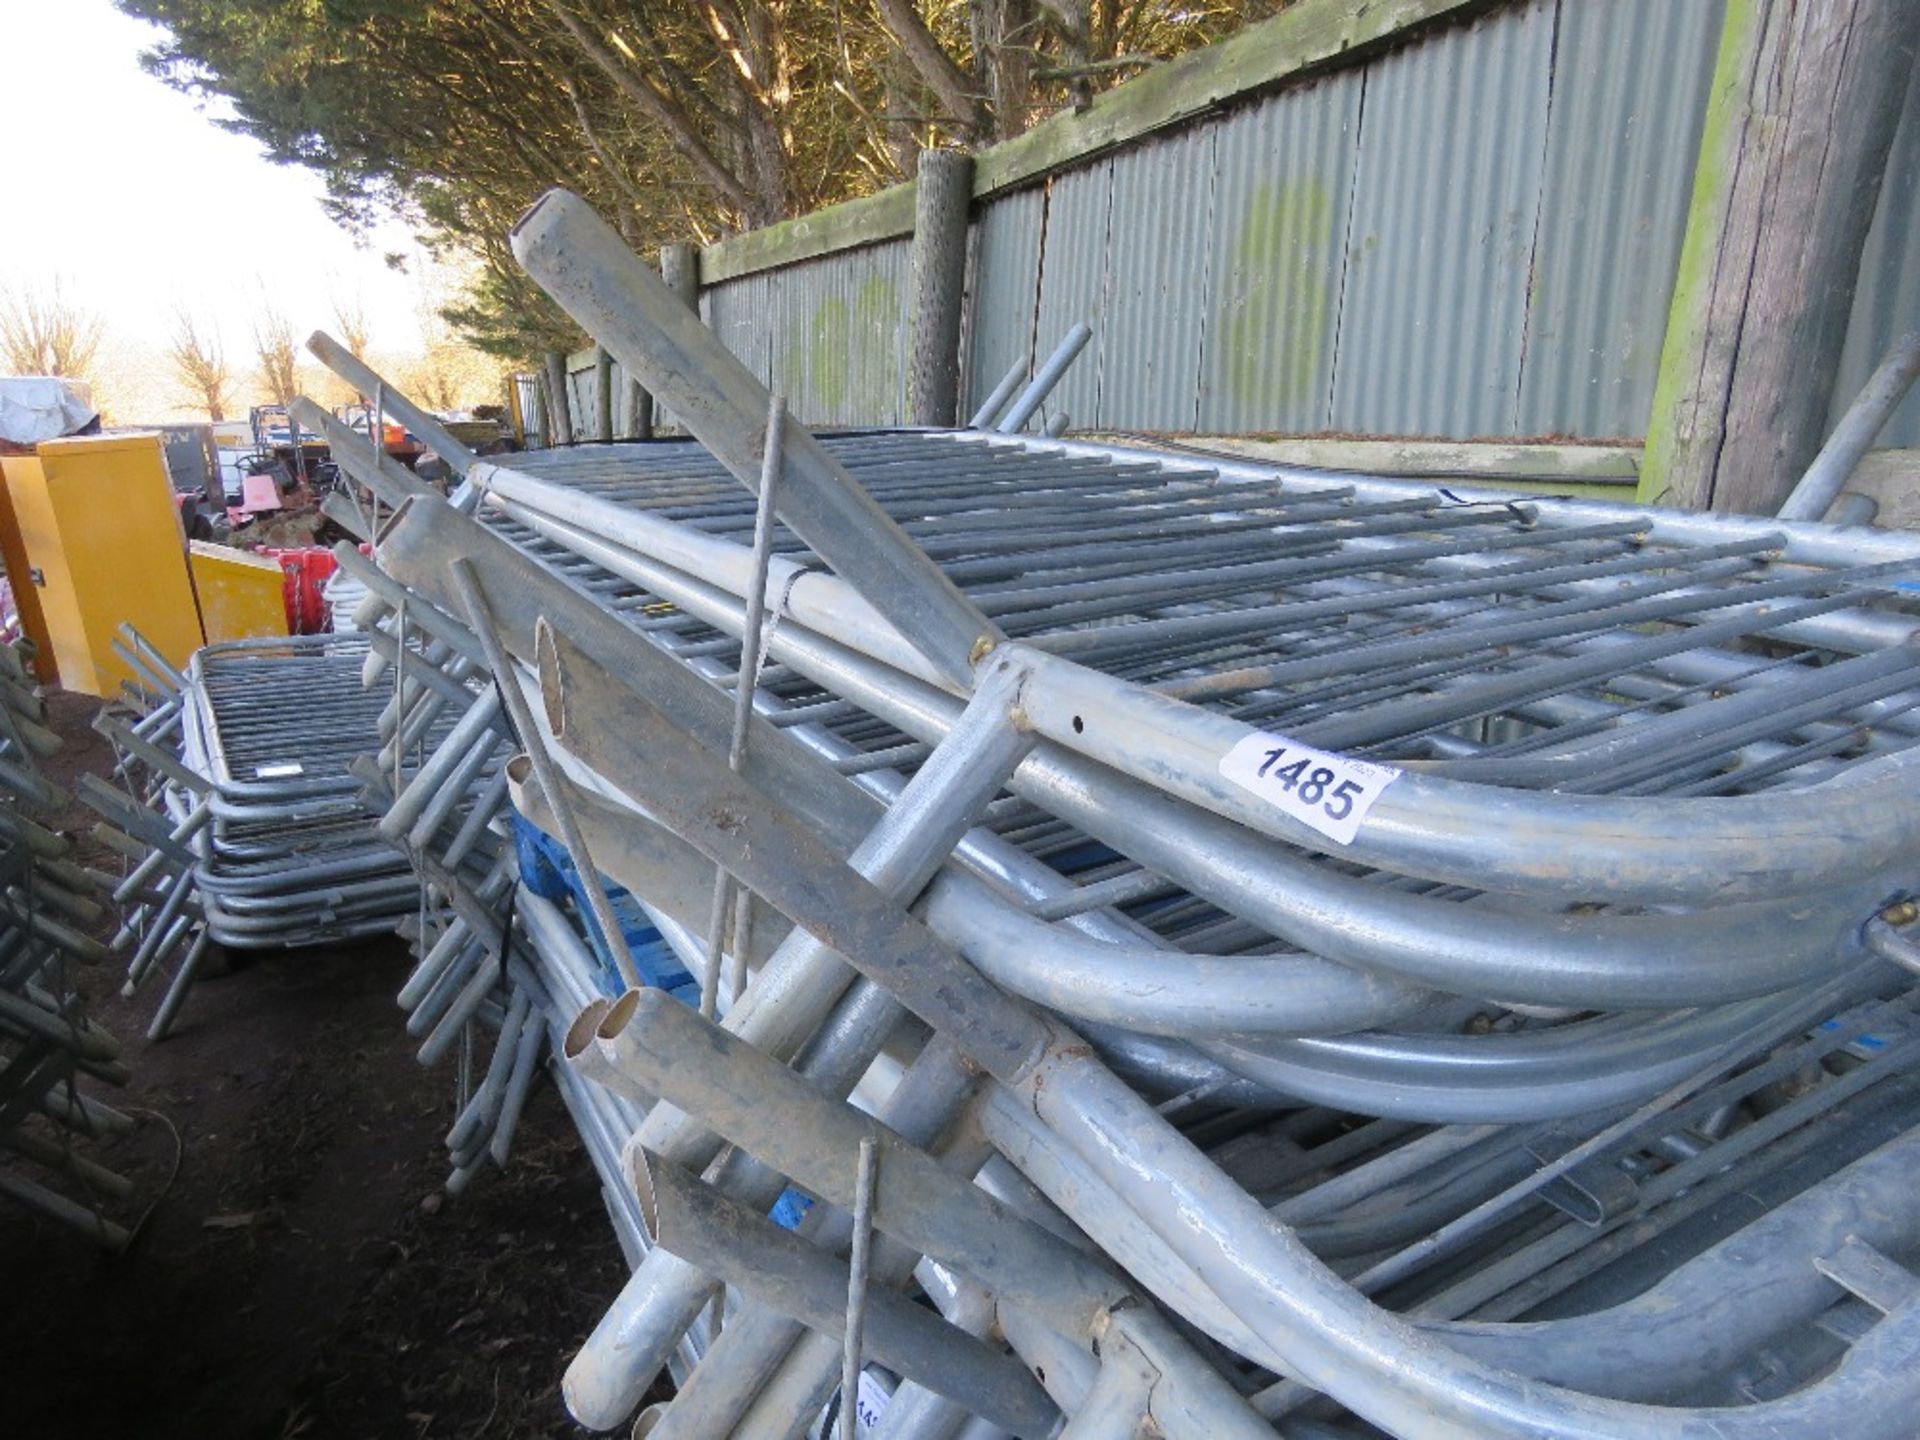 BUNDLE CONTAINING 15NO QUALITY GALVANISED CROWD BARRIERS, MAINLY SMARTWELD BRAND. MANY APPEAR UNUSED - Image 3 of 3